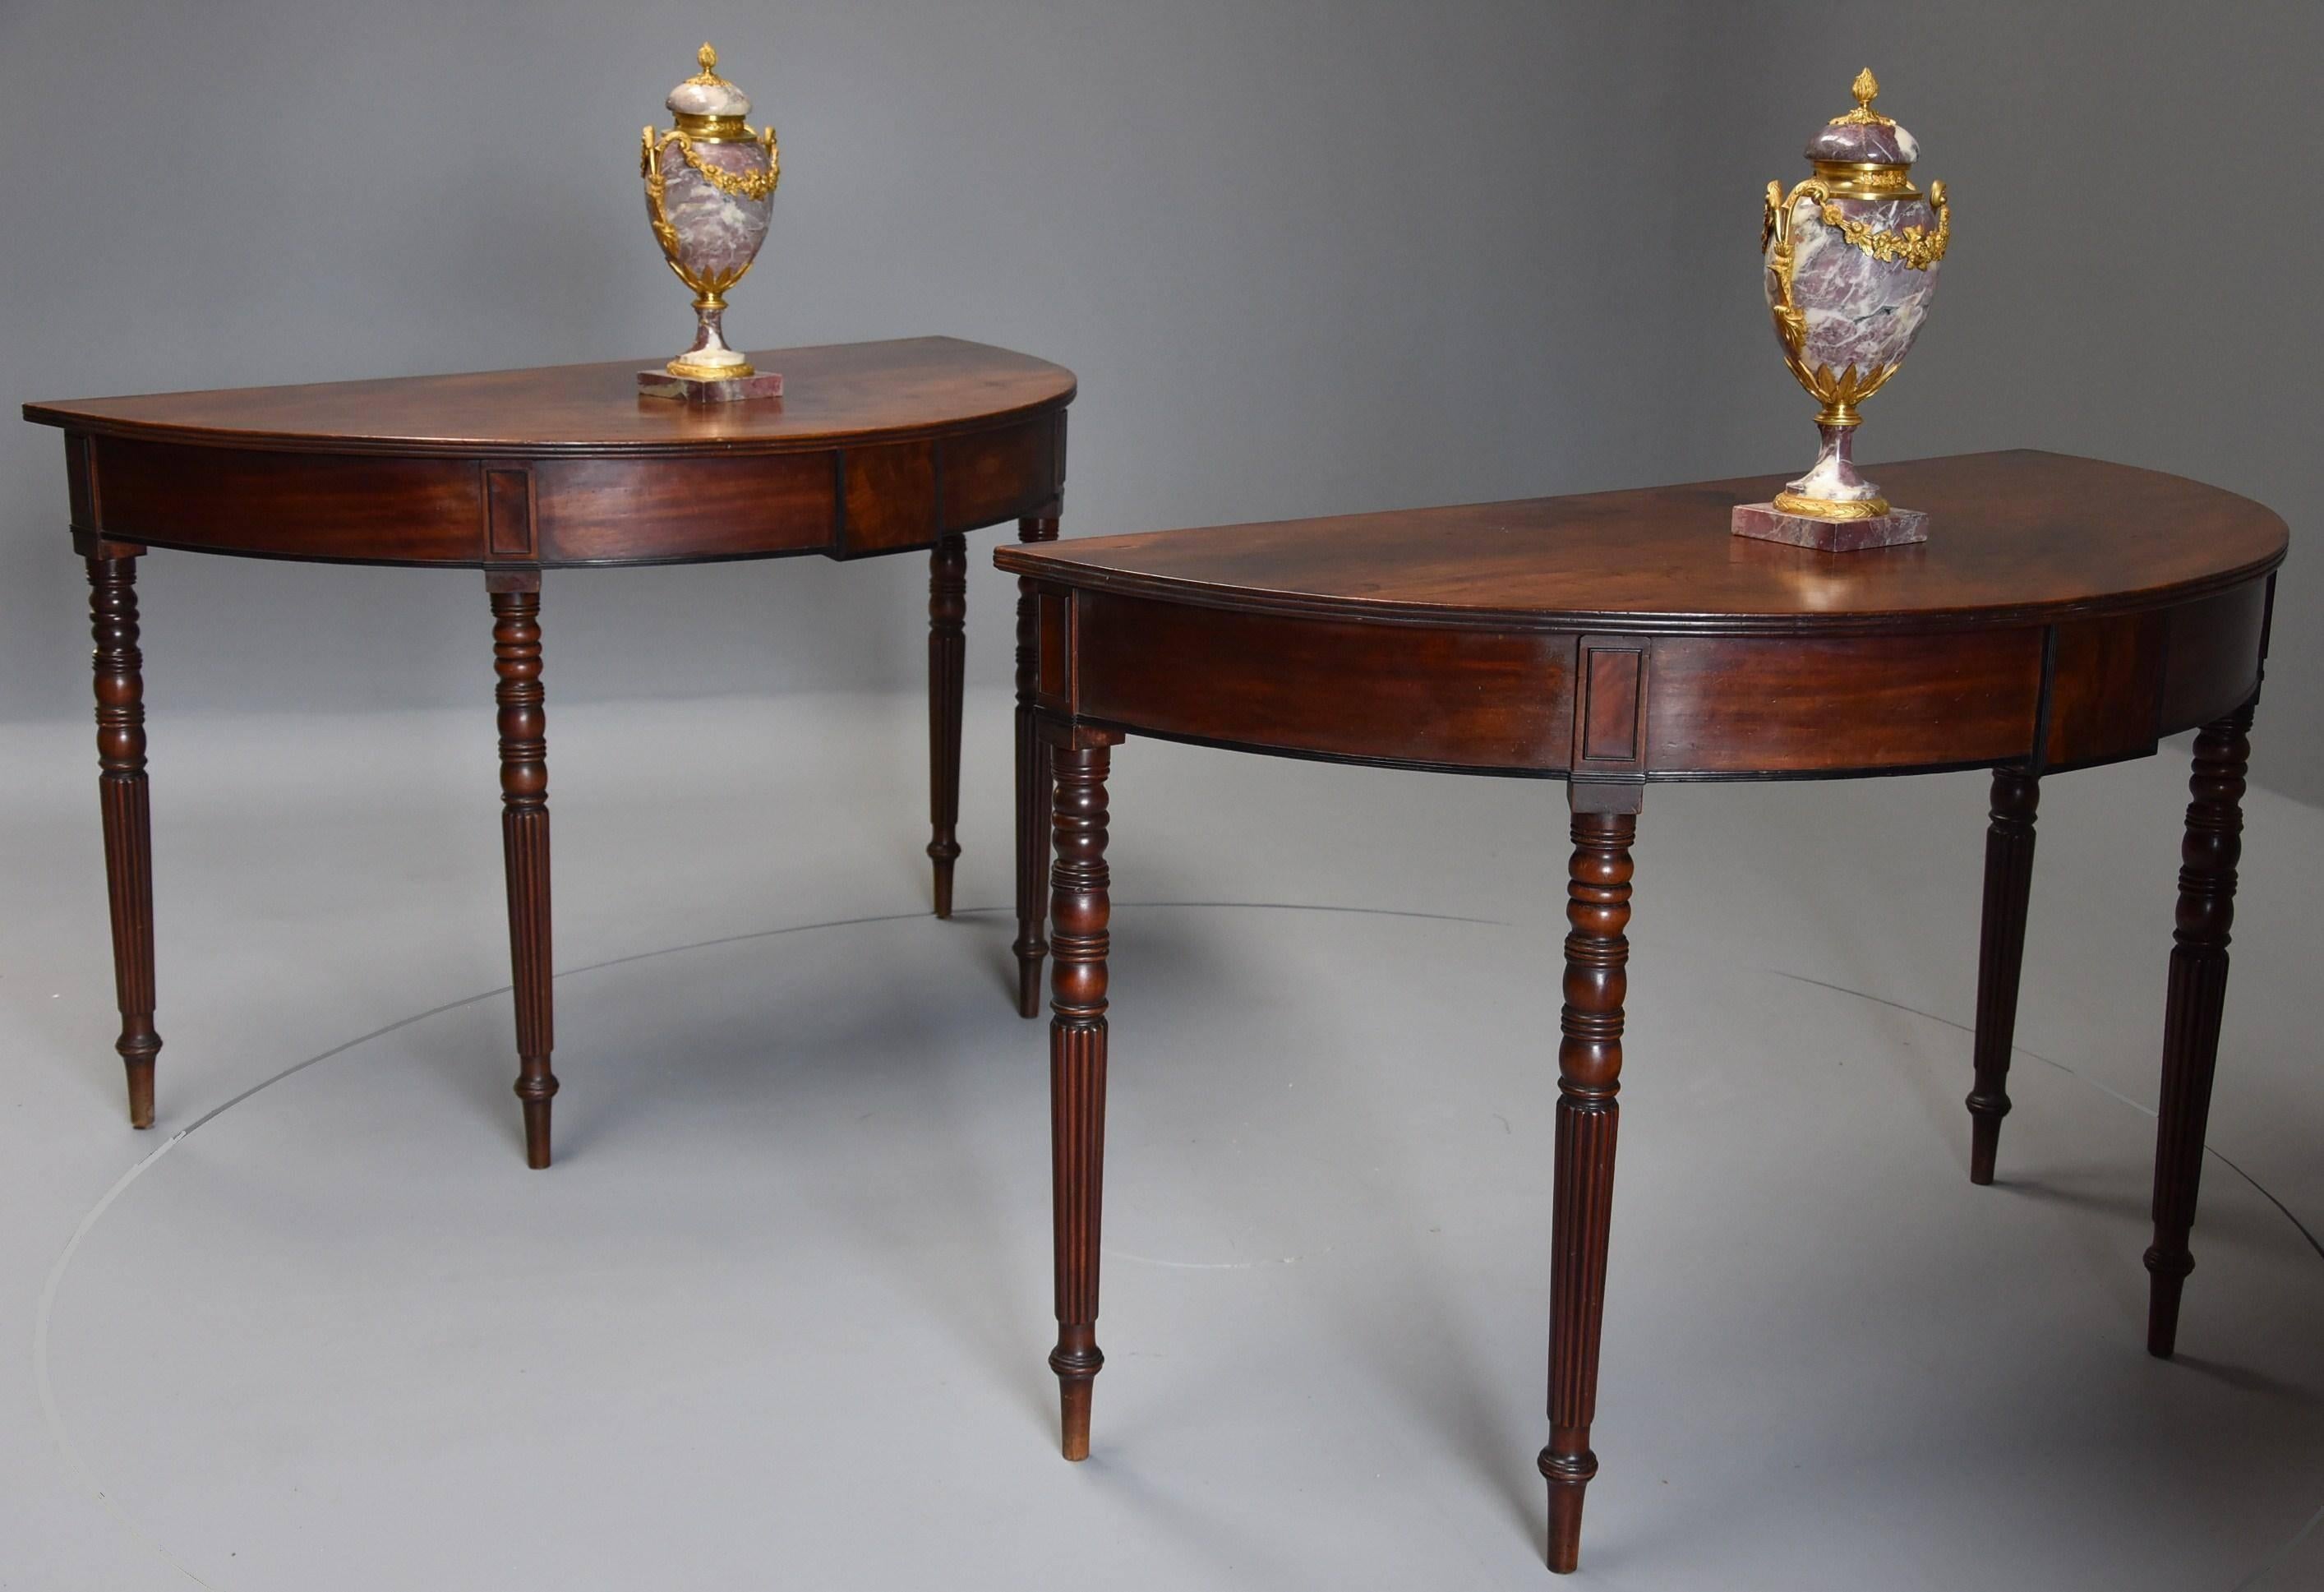 A pair of good quality early 19th century mahogany demi-lune console tables with superb original patina (color).

This pair of tables consist of solid mahogany tops with superb patina with a reeded front edge leading down to a well figured